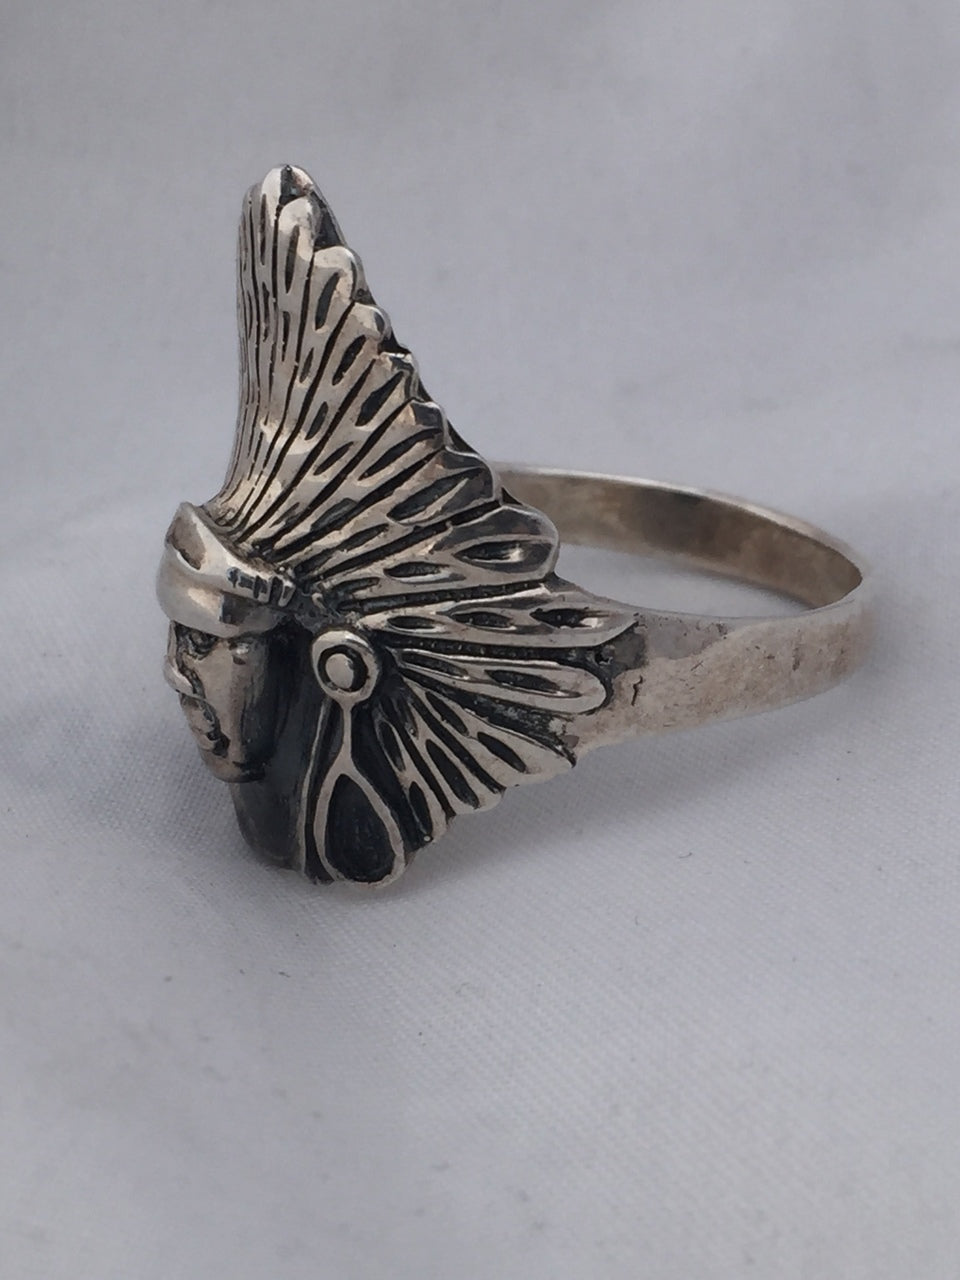 Vintage Sterling Silver Native American Chief Ring Southwestern & Tribal   Size 14.75 Weight 11.6g